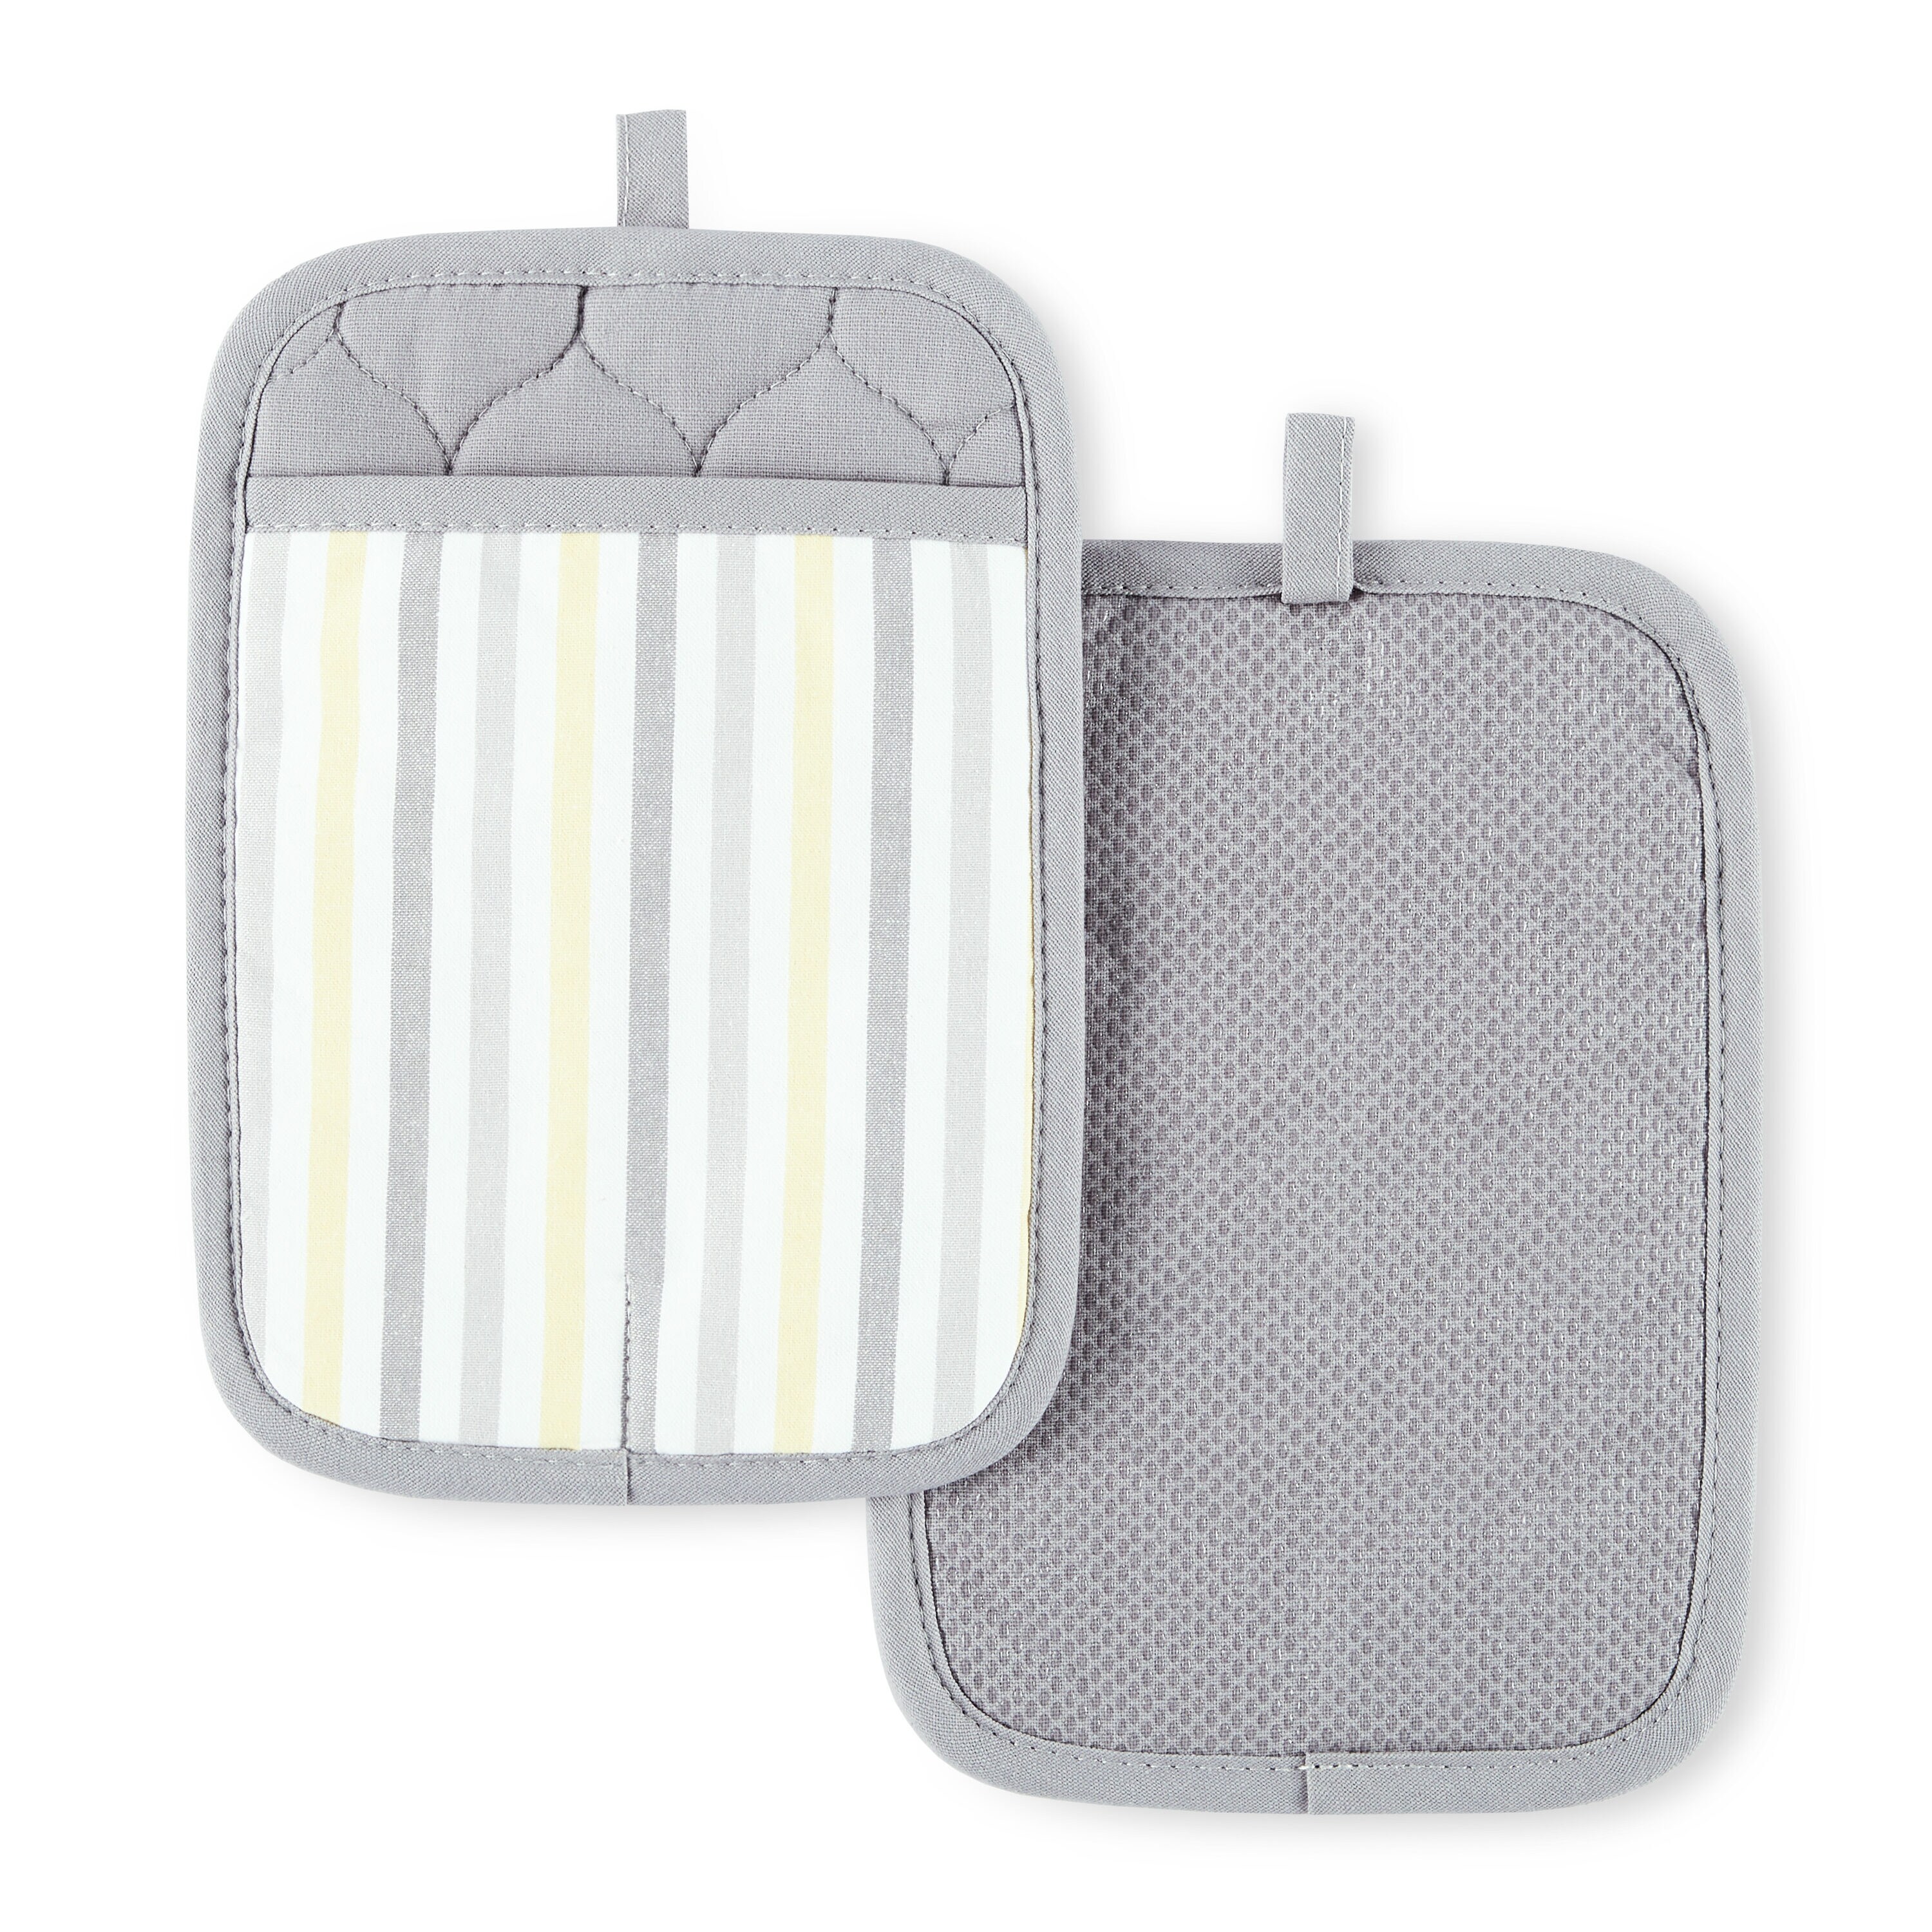 New Set 2 KITCHEN AID POT HOLDERS GRAY TEXTURED SILICONE 100% COTTON